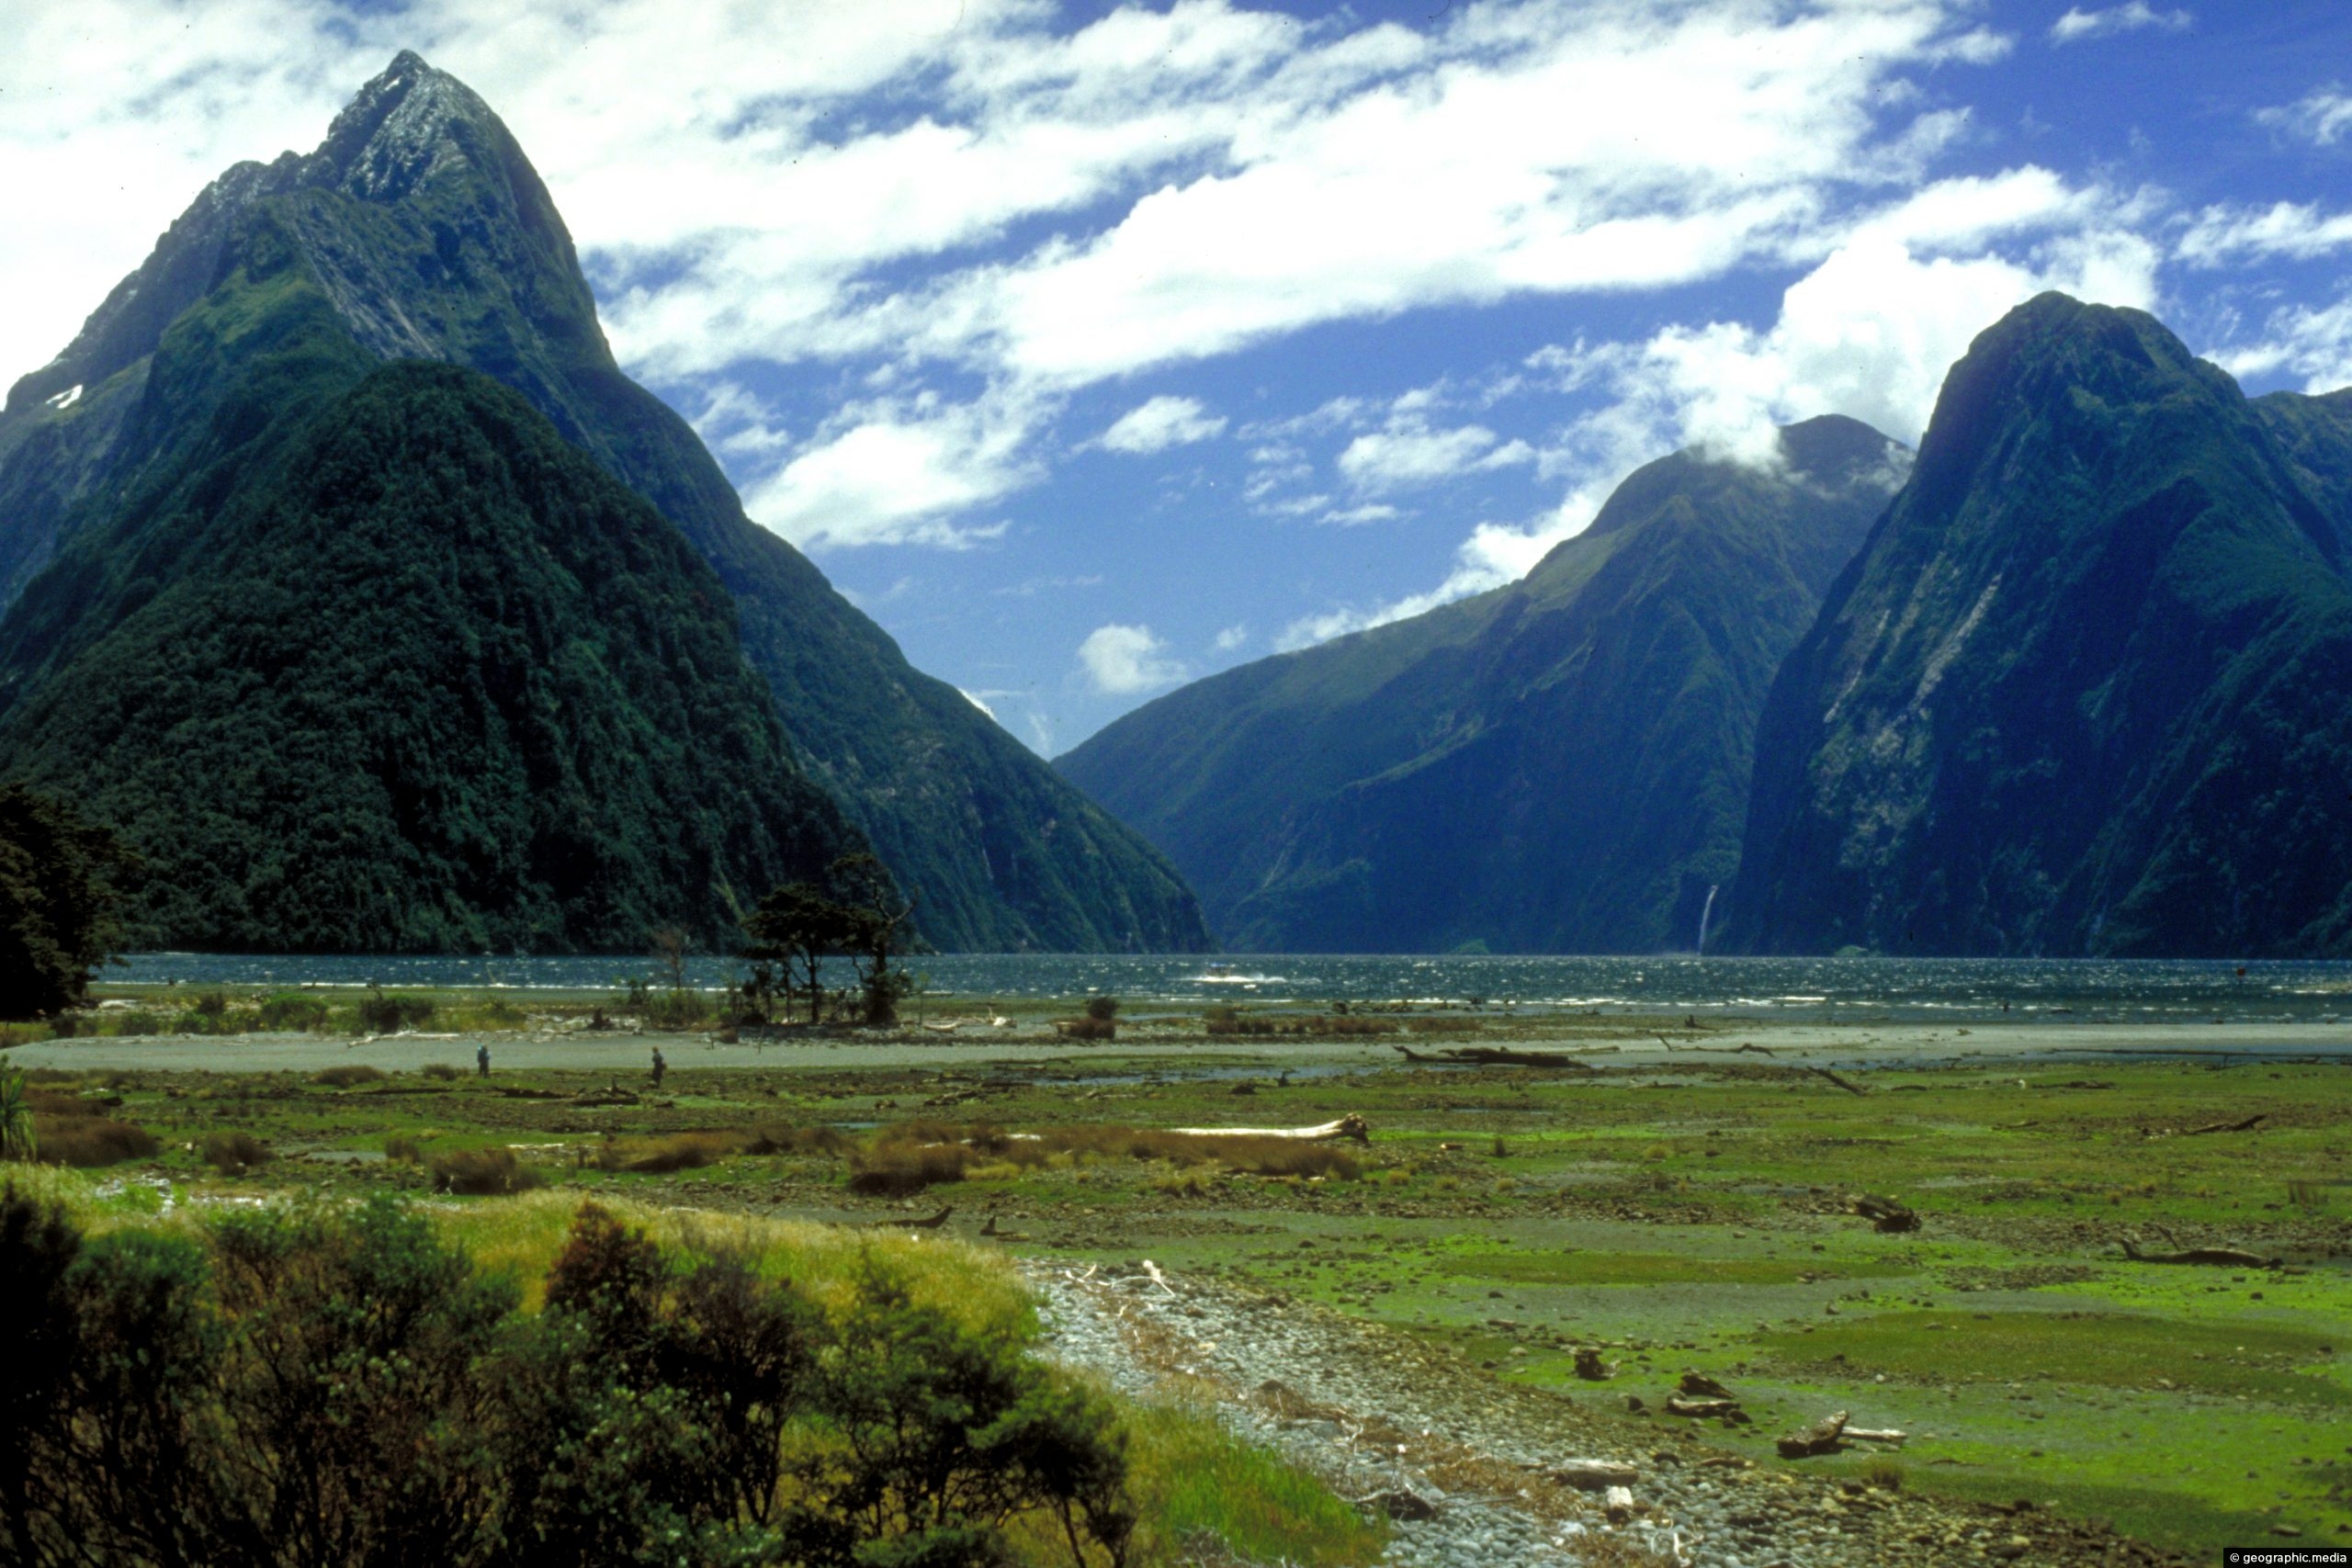 Milford Sound with Mitre Peak in view.